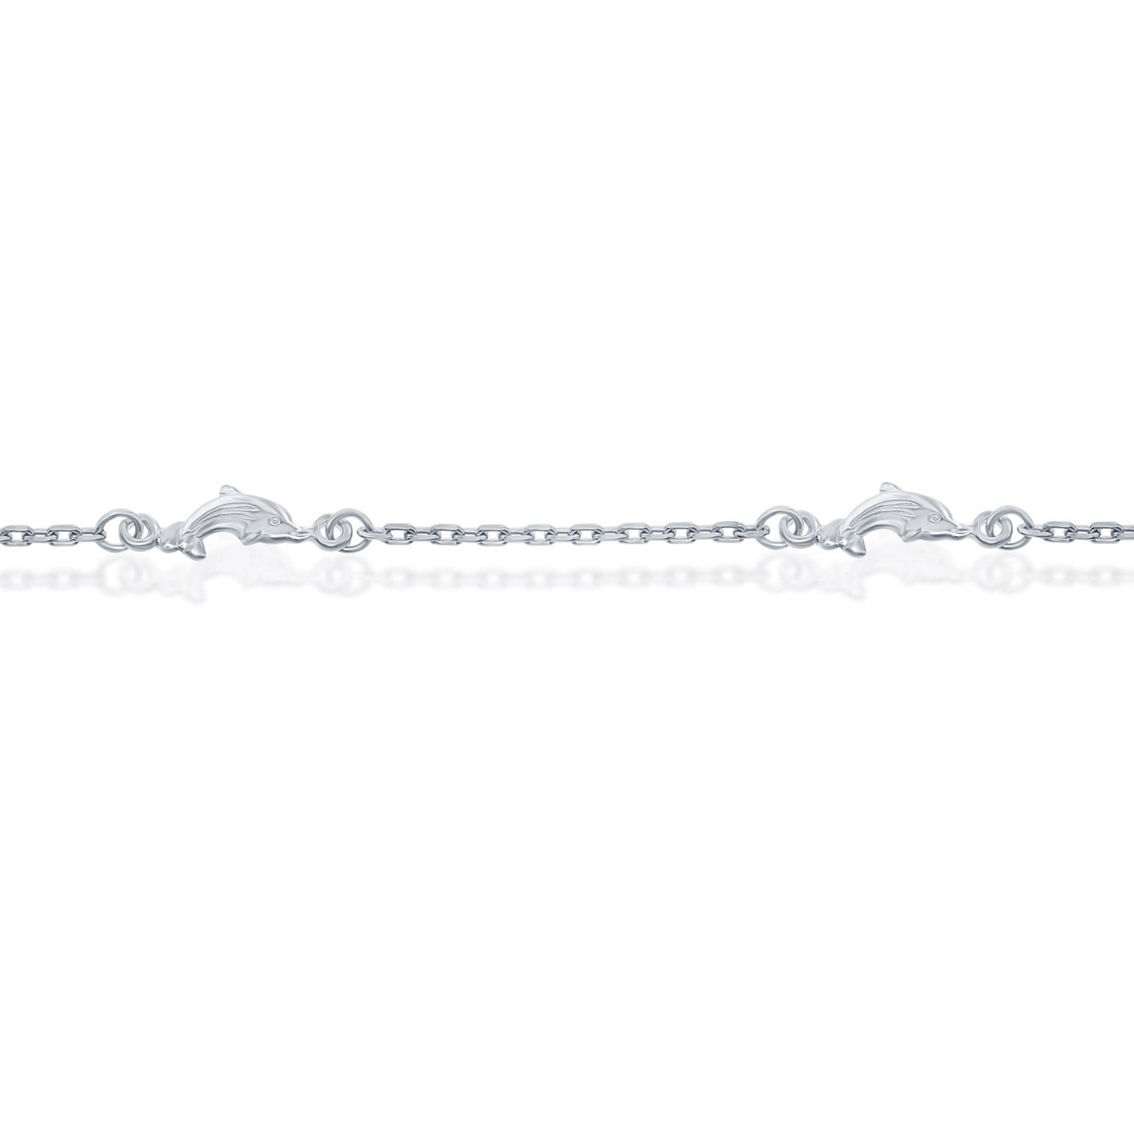 Bella Silver Sterling Silver Dolphins Anklet - Image 2 of 3